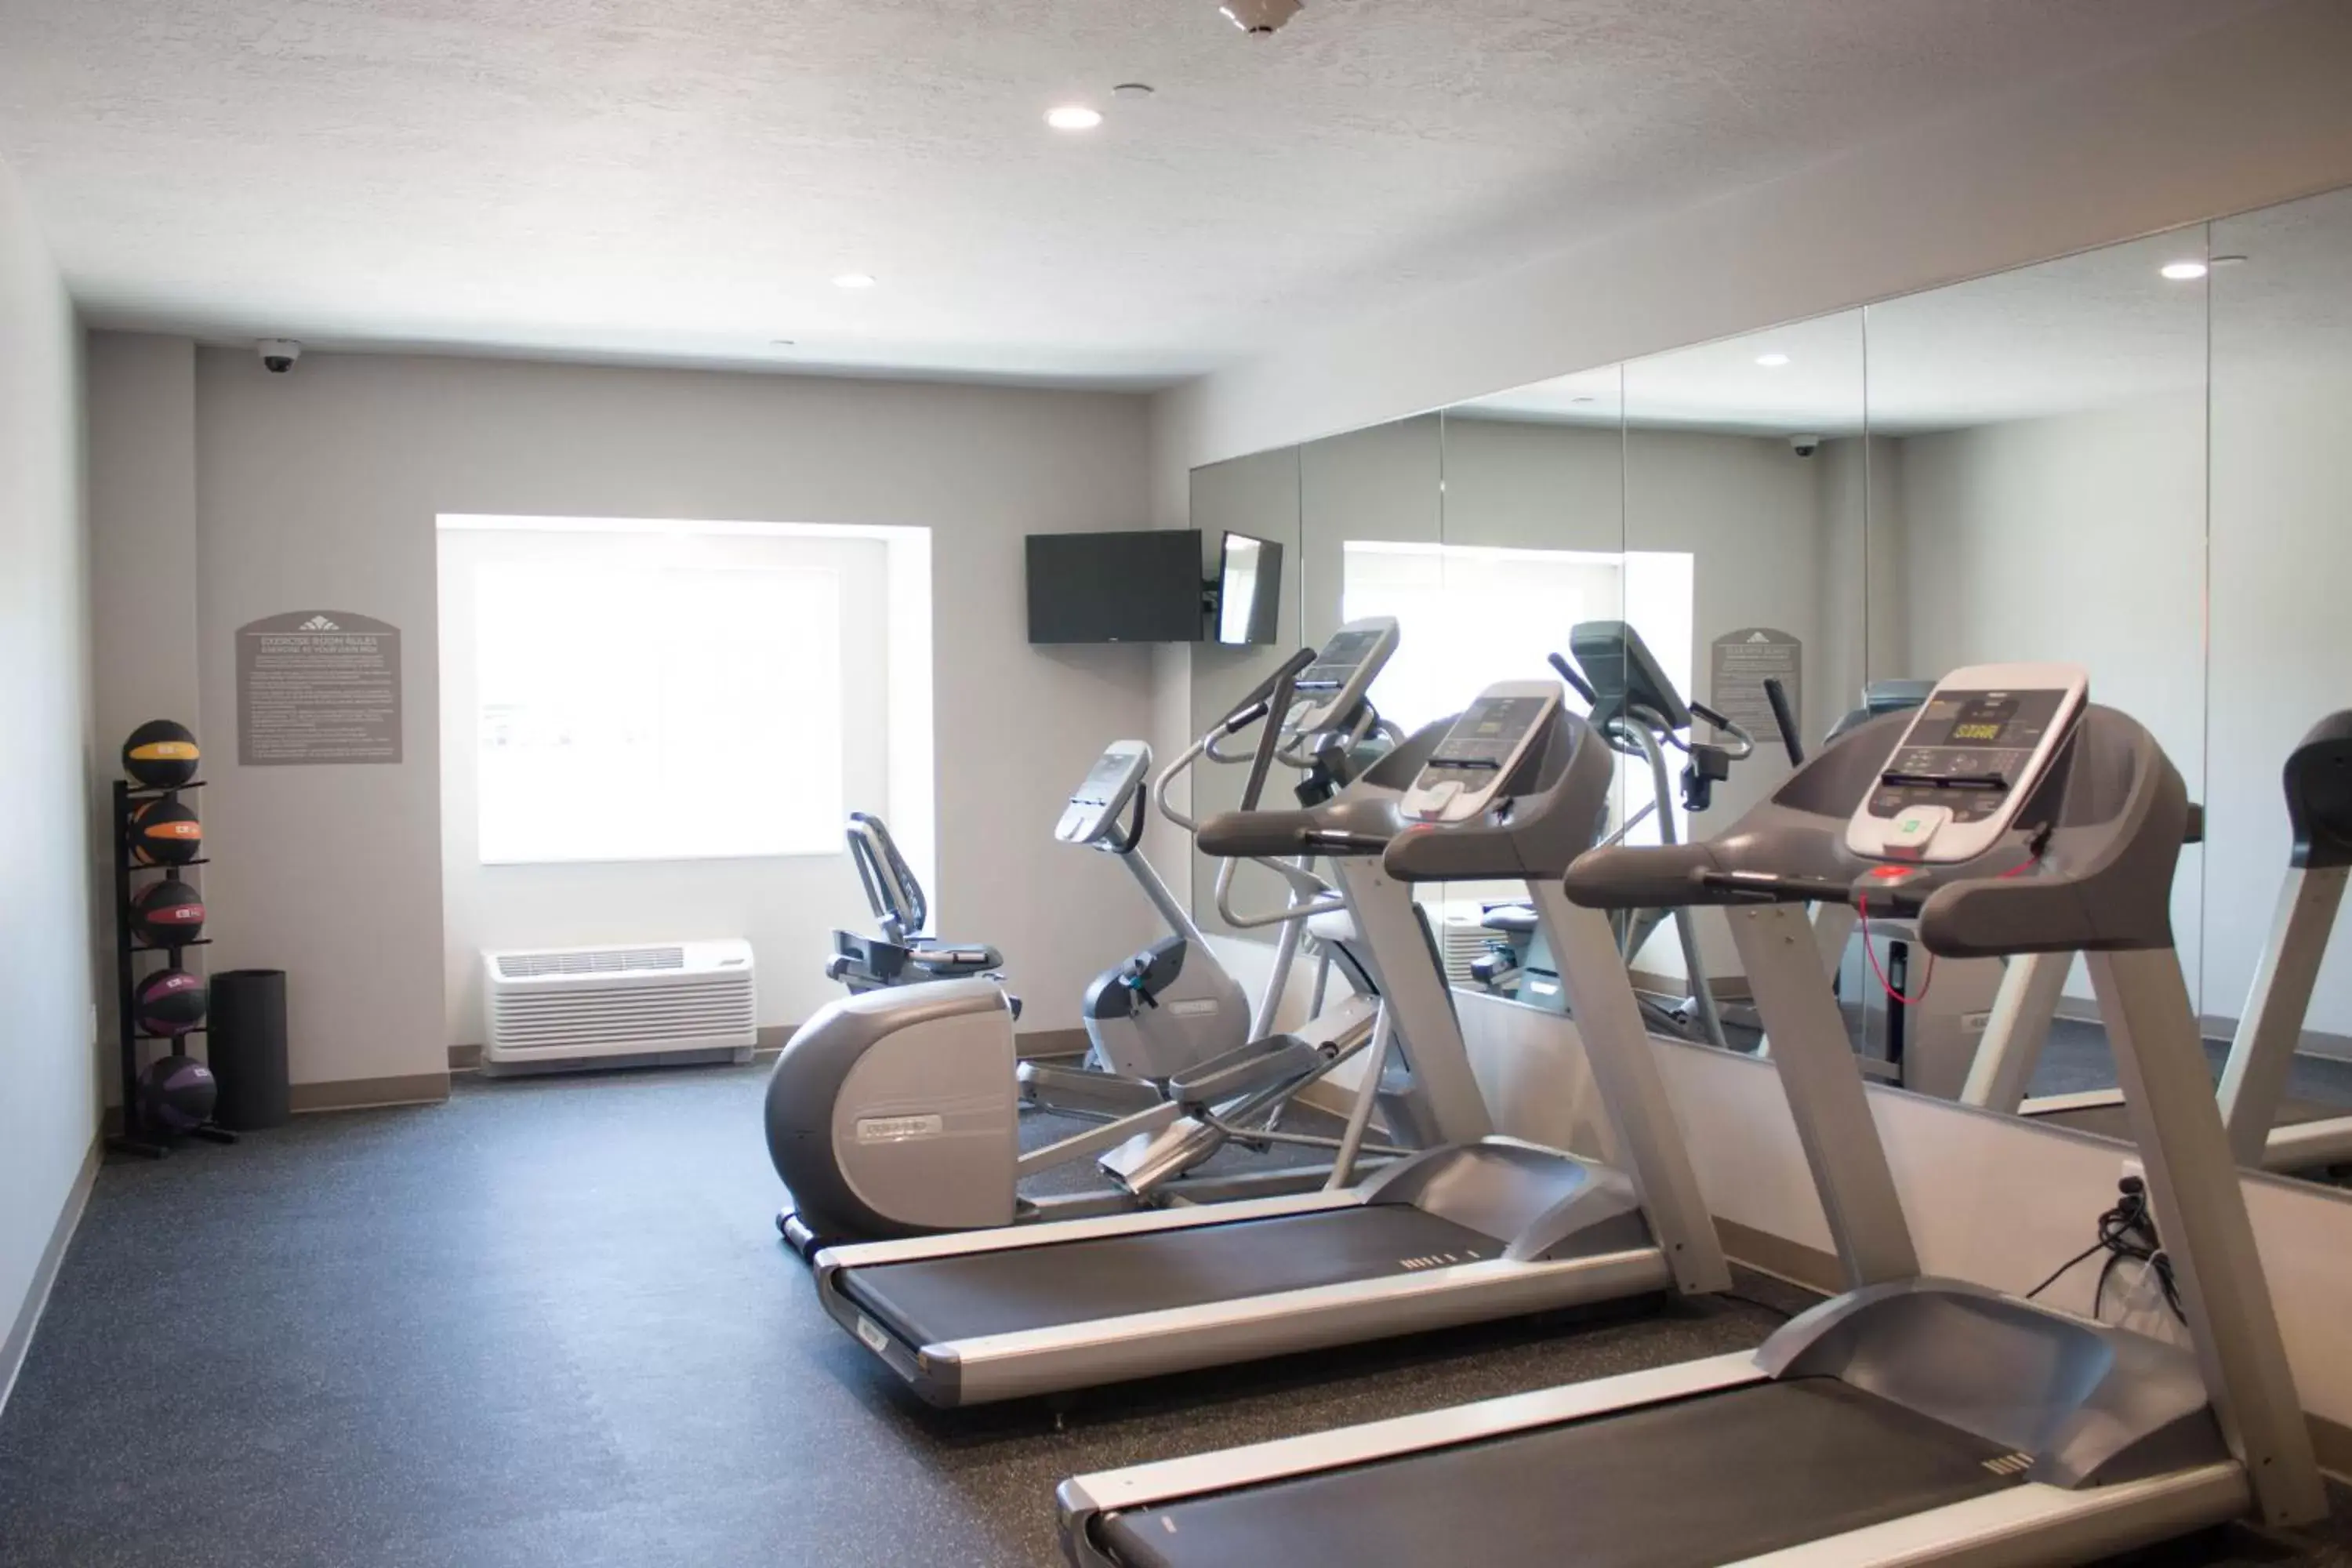 Fitness centre/facilities, Fitness Center/Facilities in Microtel Inn & Suites by Wyndham Springville